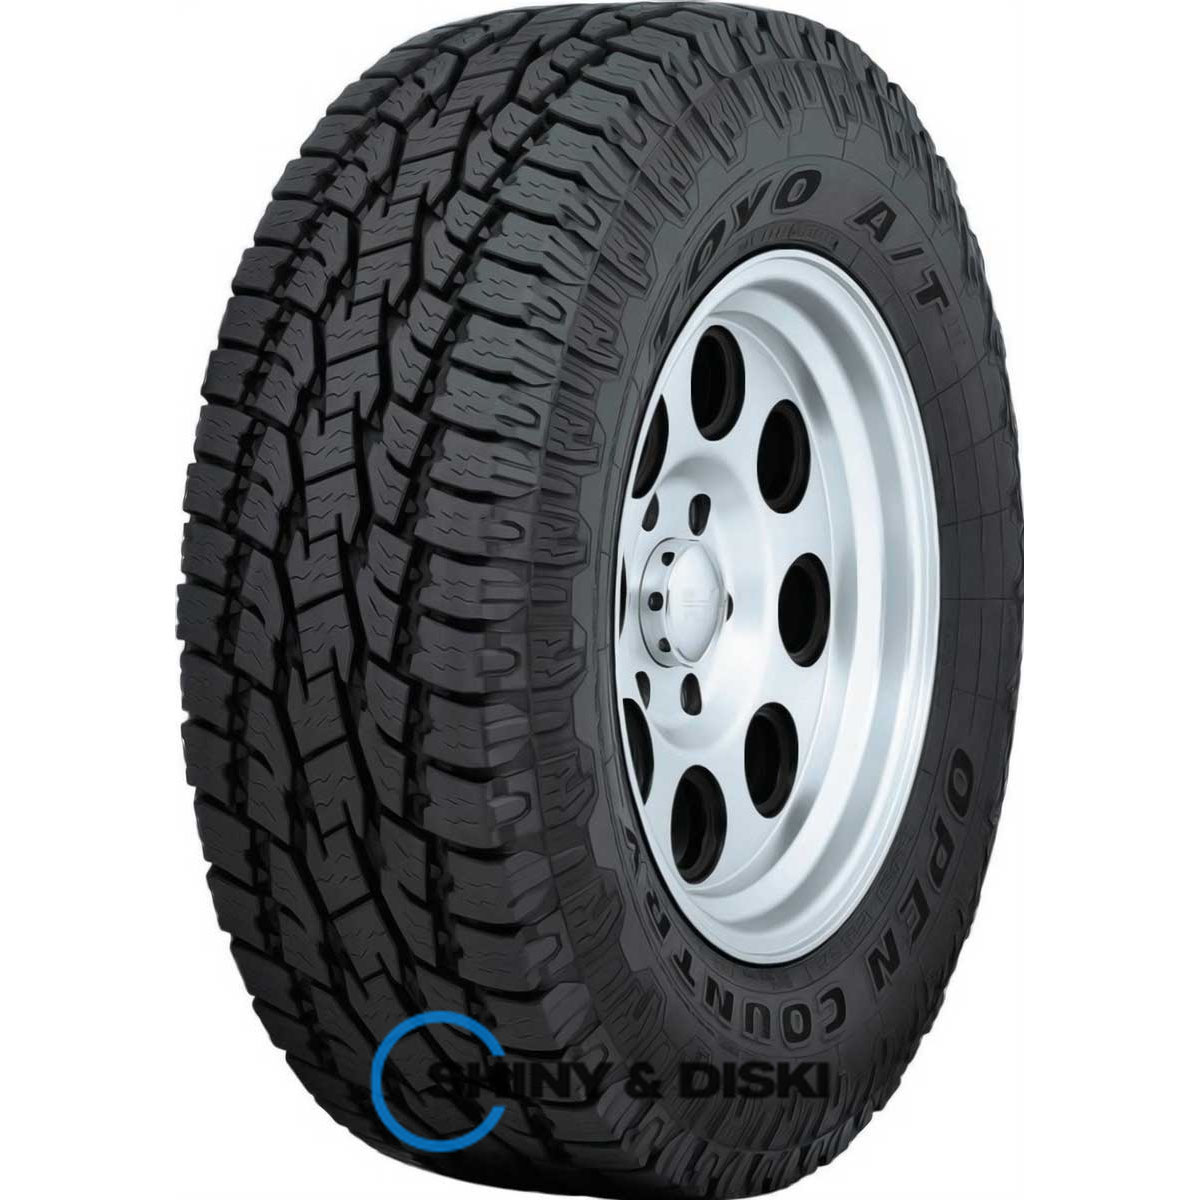 toyo open country a/t plus 245/70 r16 120/116s